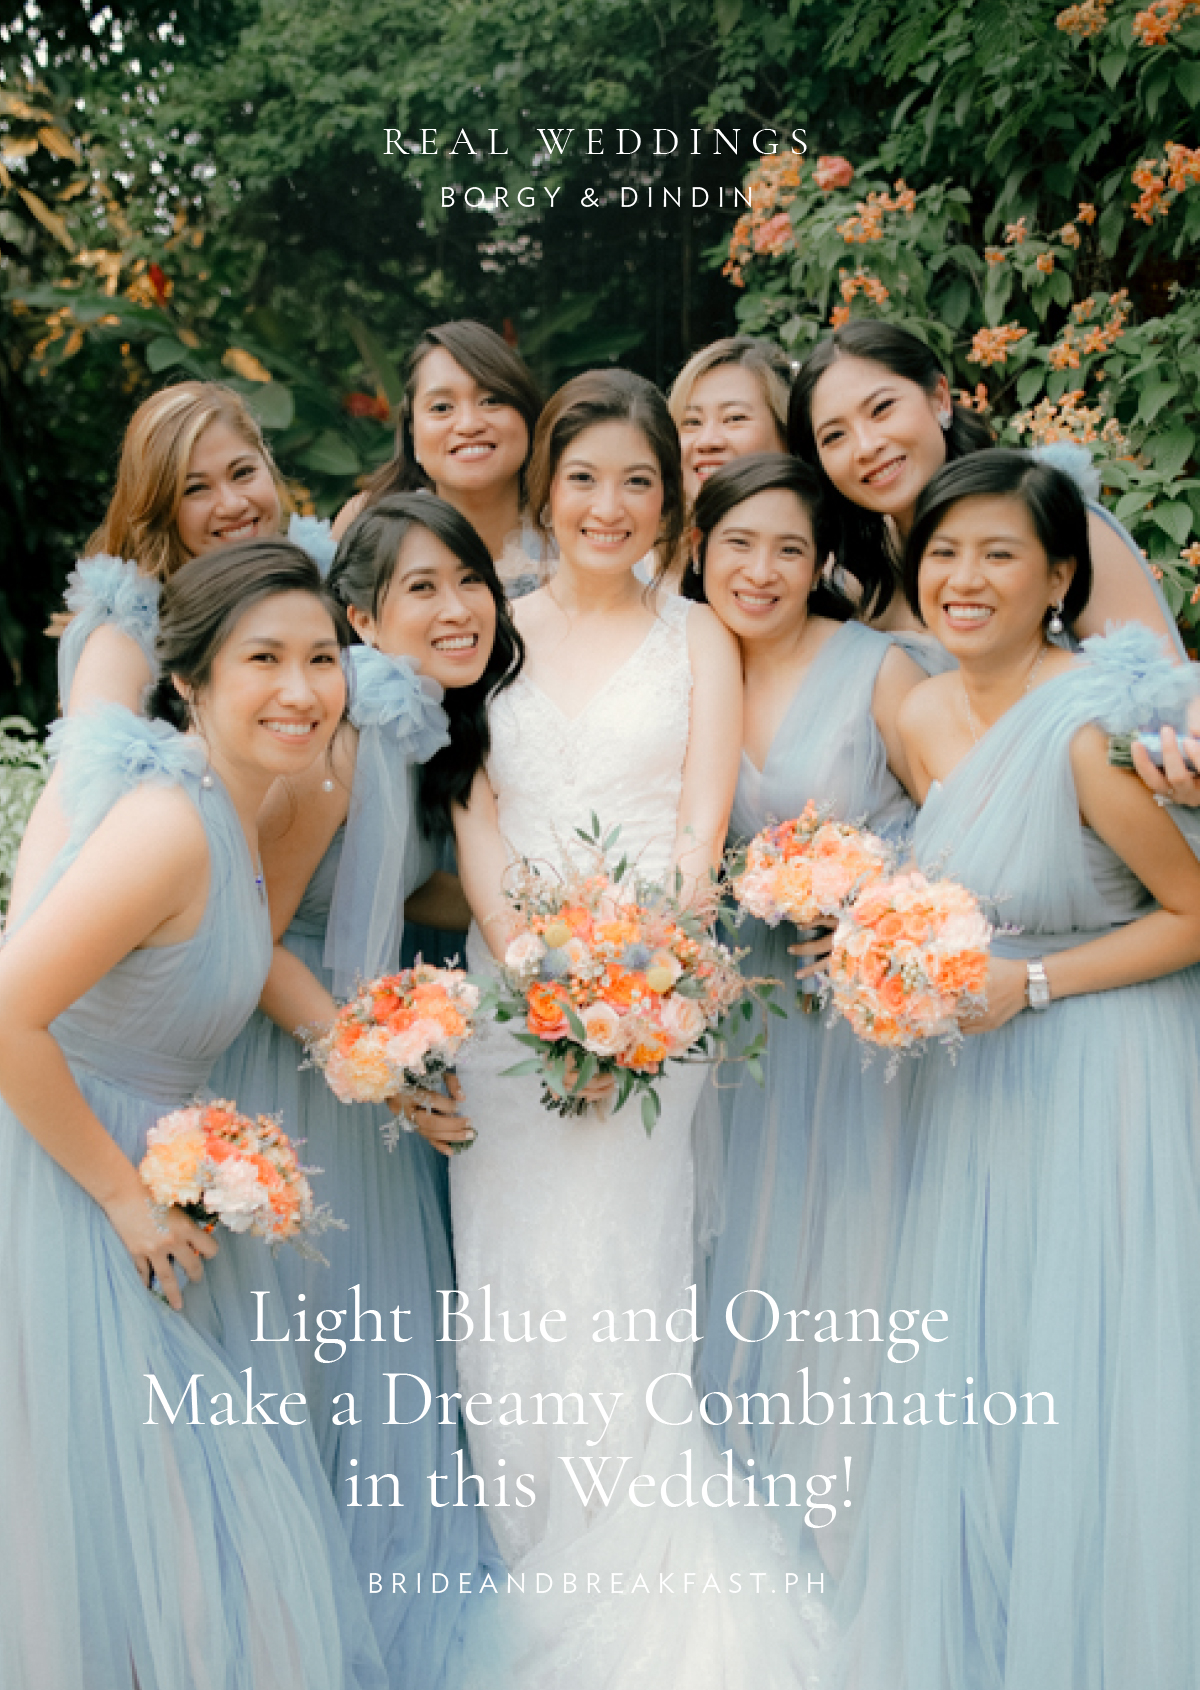 Light Blue and Orange Make a Dreamy Combination in this Wedding!